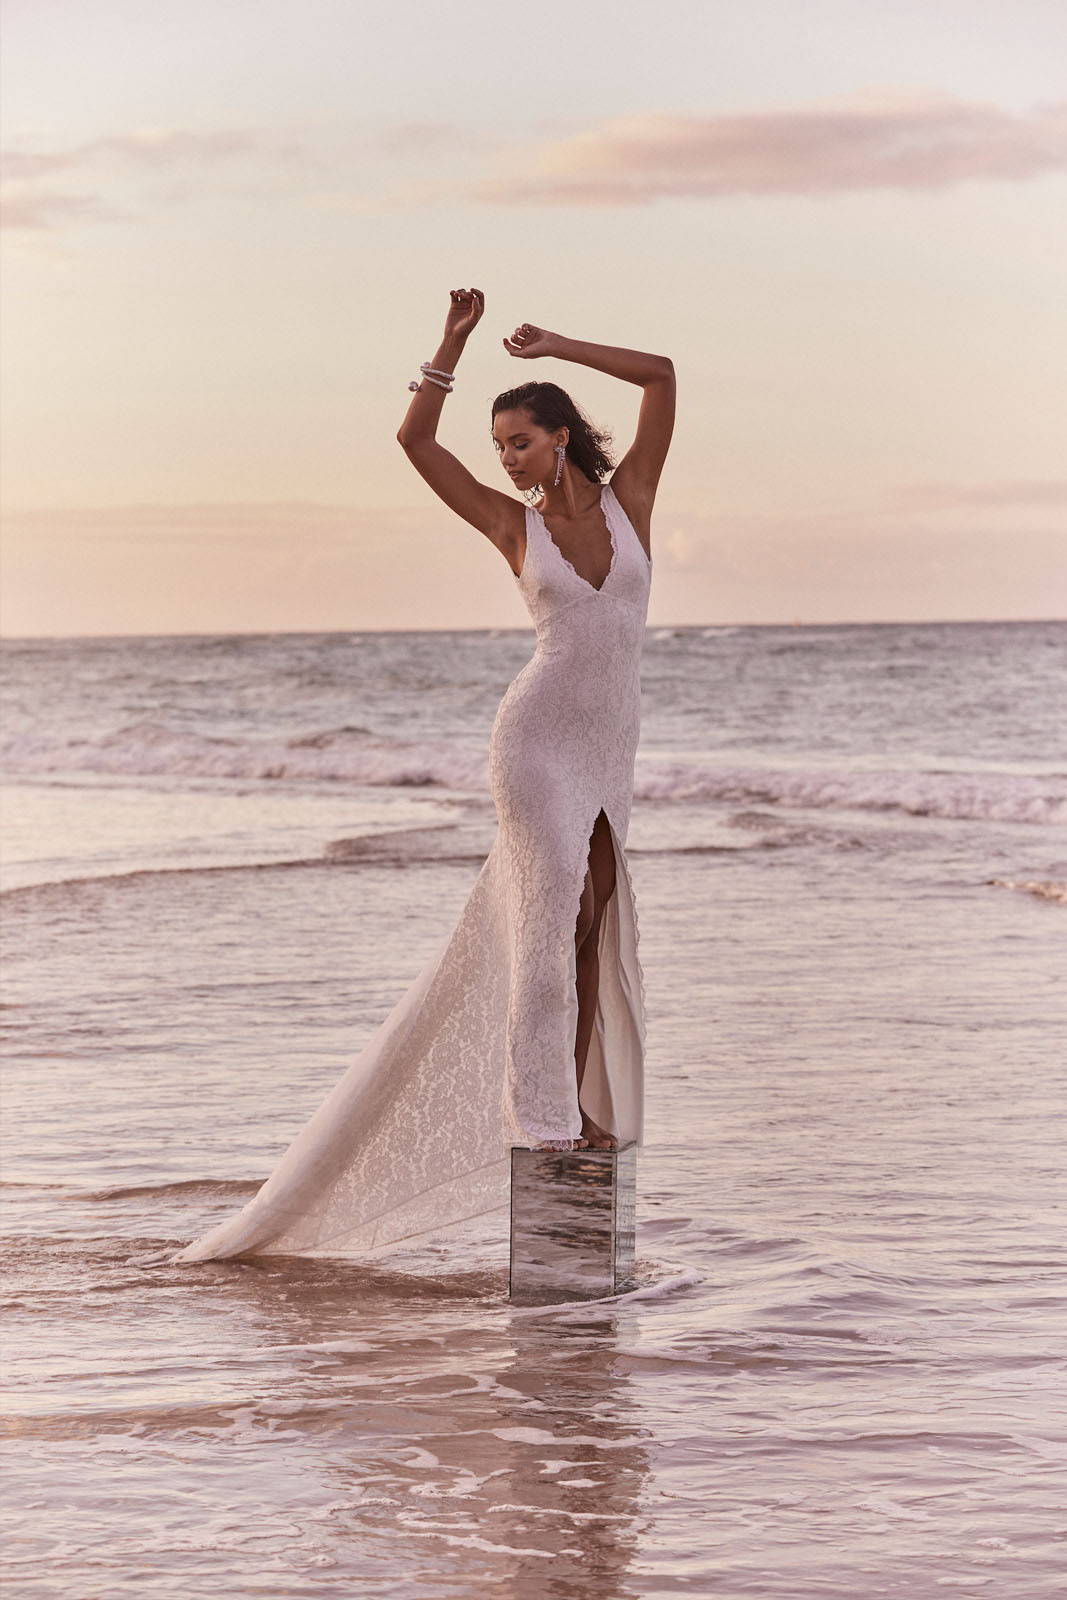 Campaign imagery of model in Lumi gown on the beach